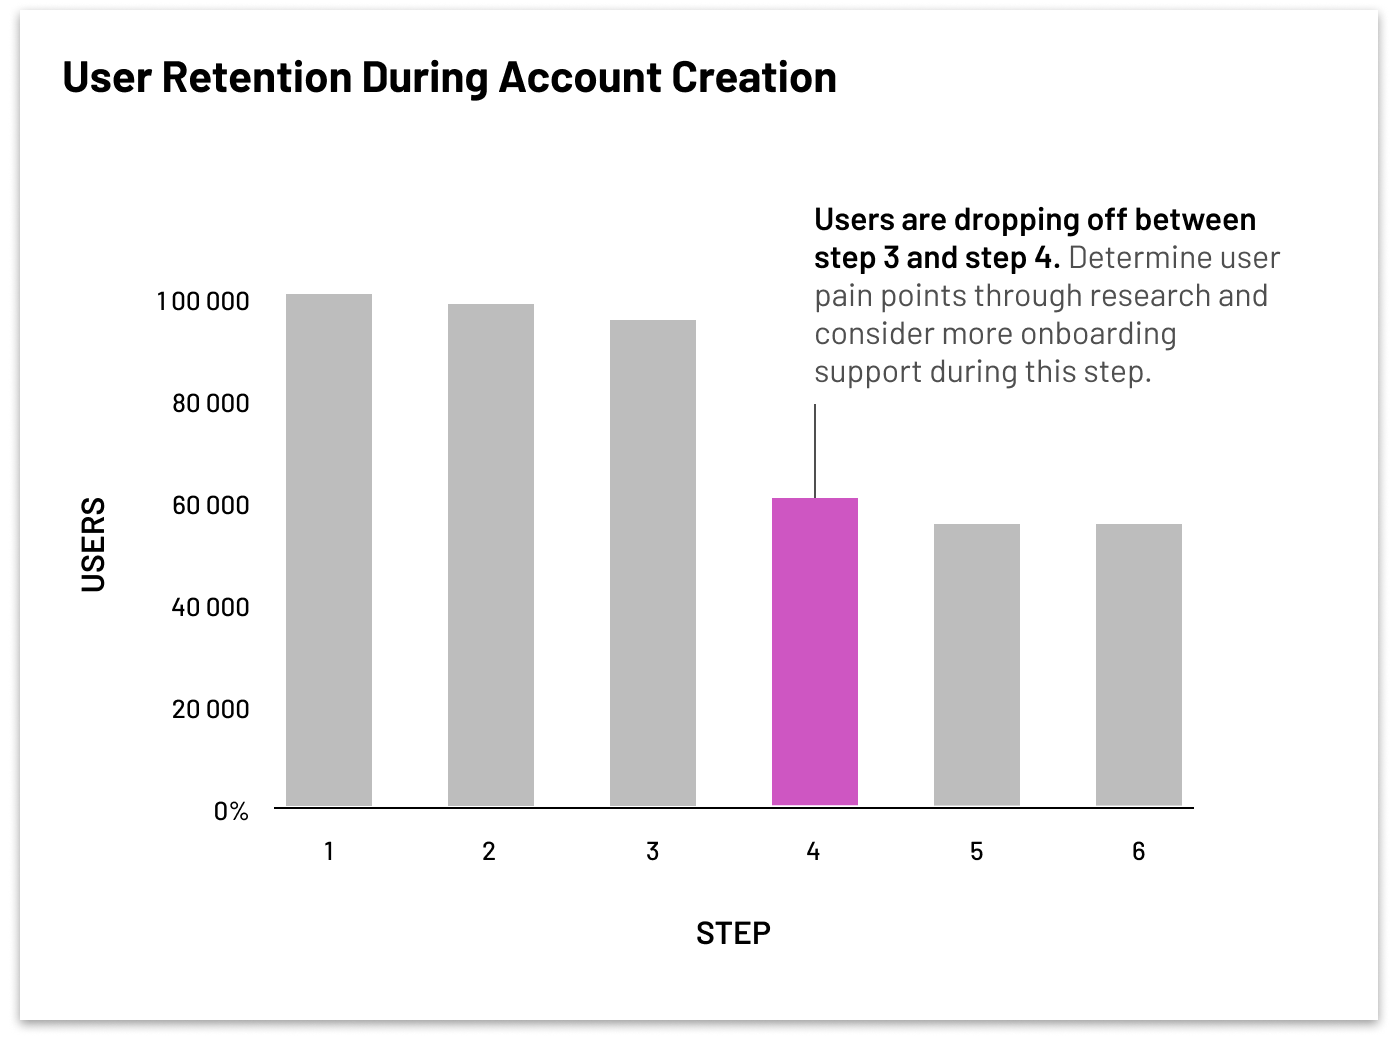 A bar graph showing a large dropoff in user retention between steps 3 and 4 of an account creation flow. The chart recommends research and more onboarding support during step 4.